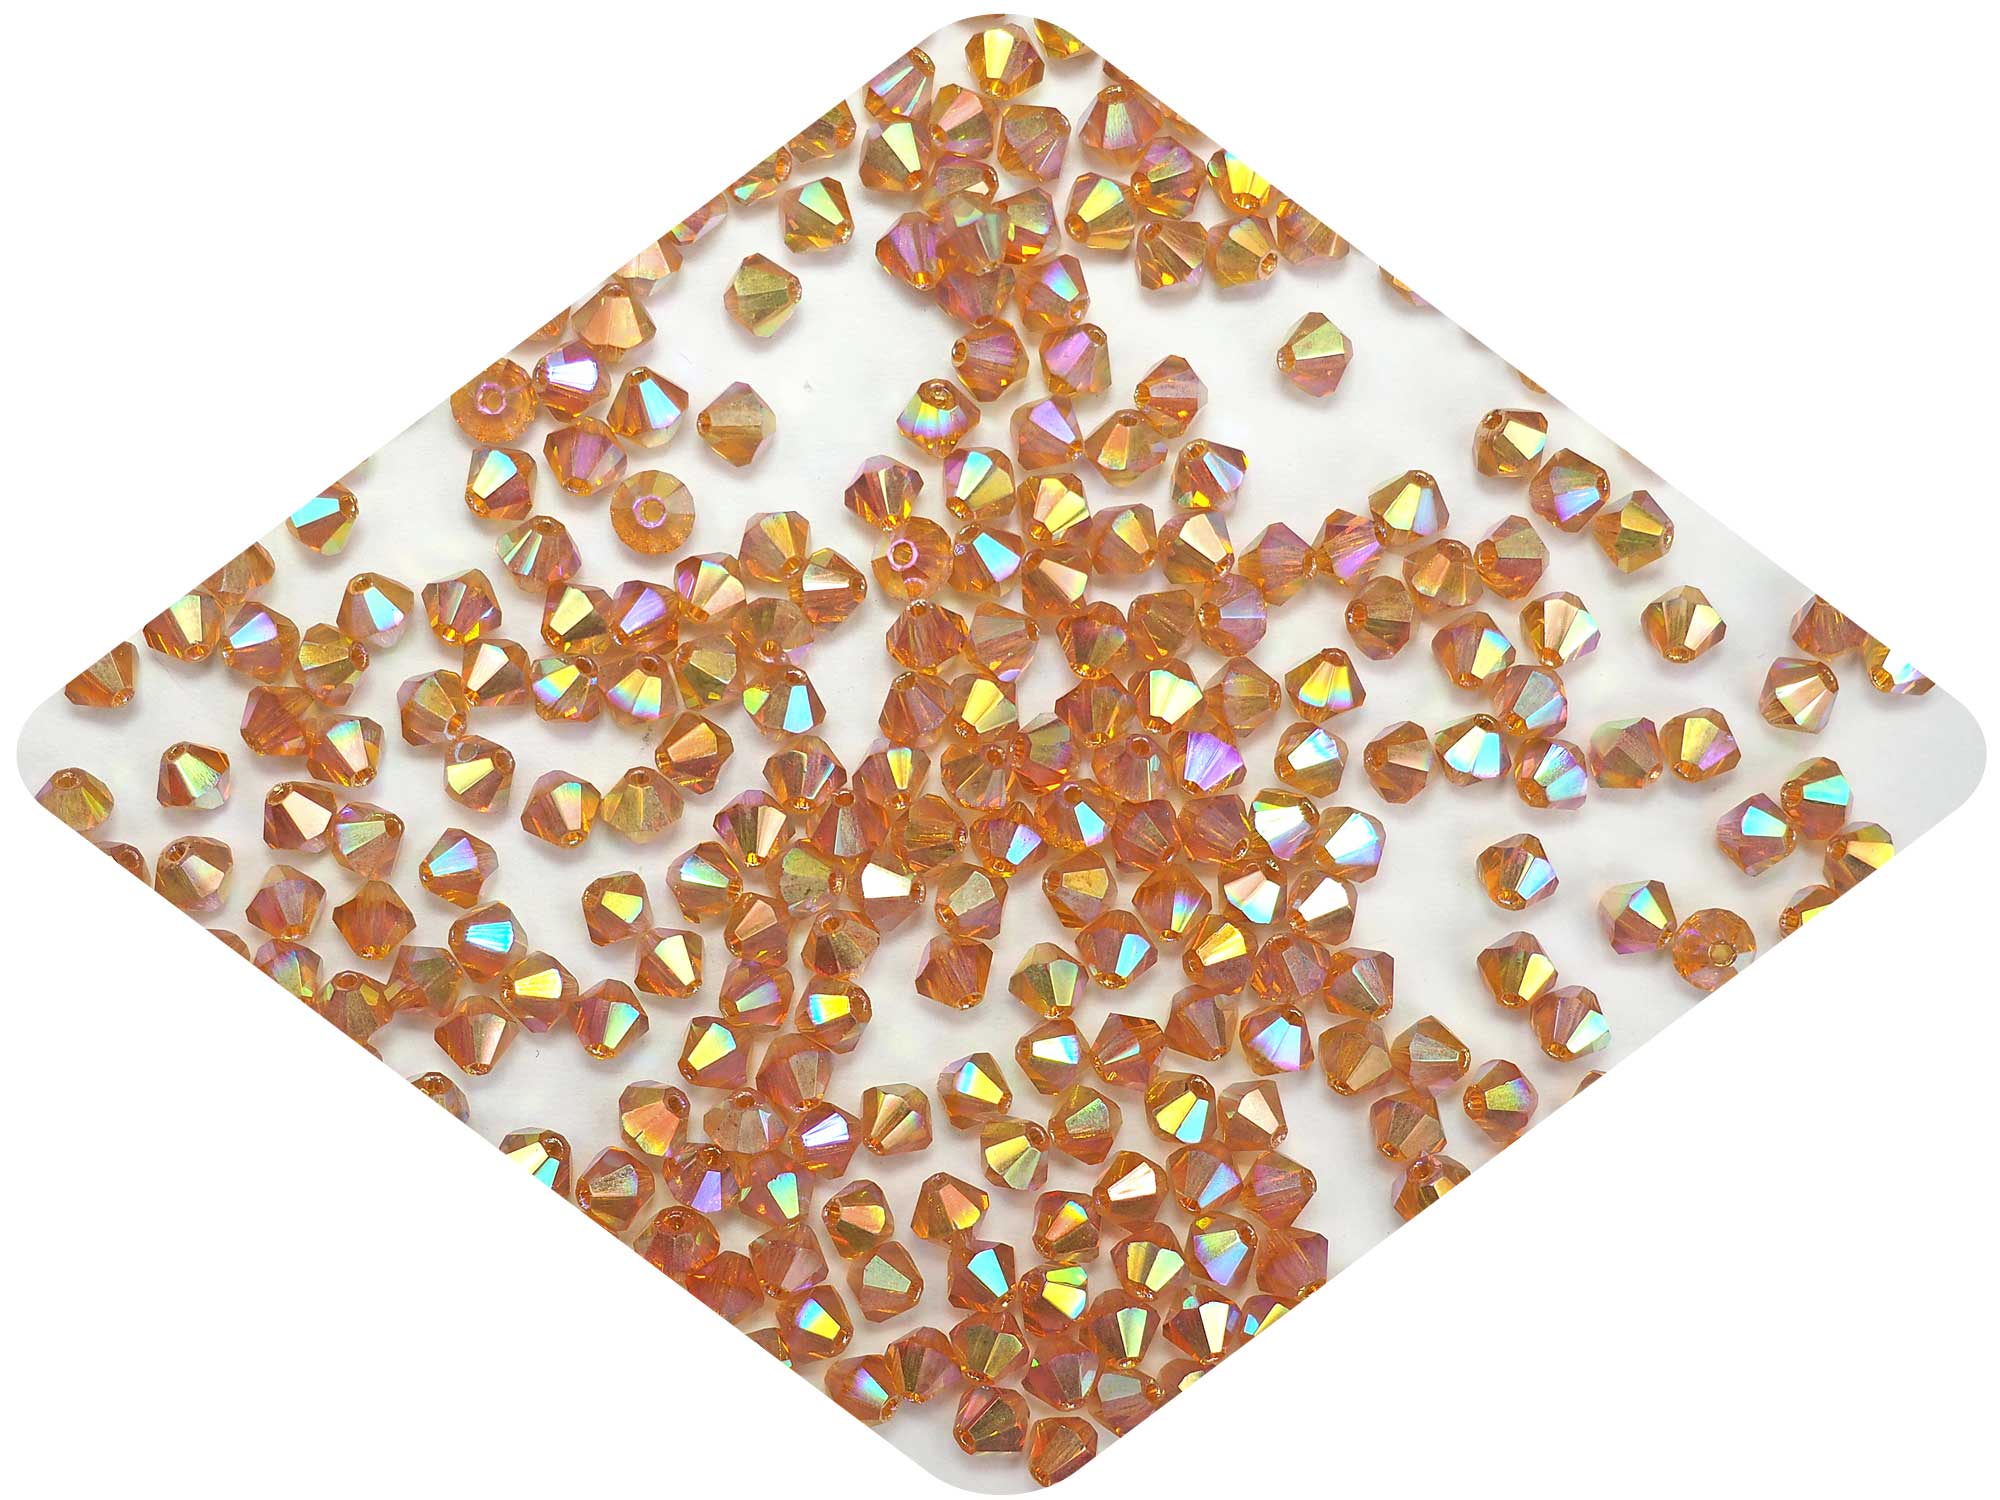 Topaz Marvel-AB, Czech Glass Beads, Machine Cut Bicones (MC Rondell, Diamond Shape), golden brown crystals coated with RICH Aurora Borealis